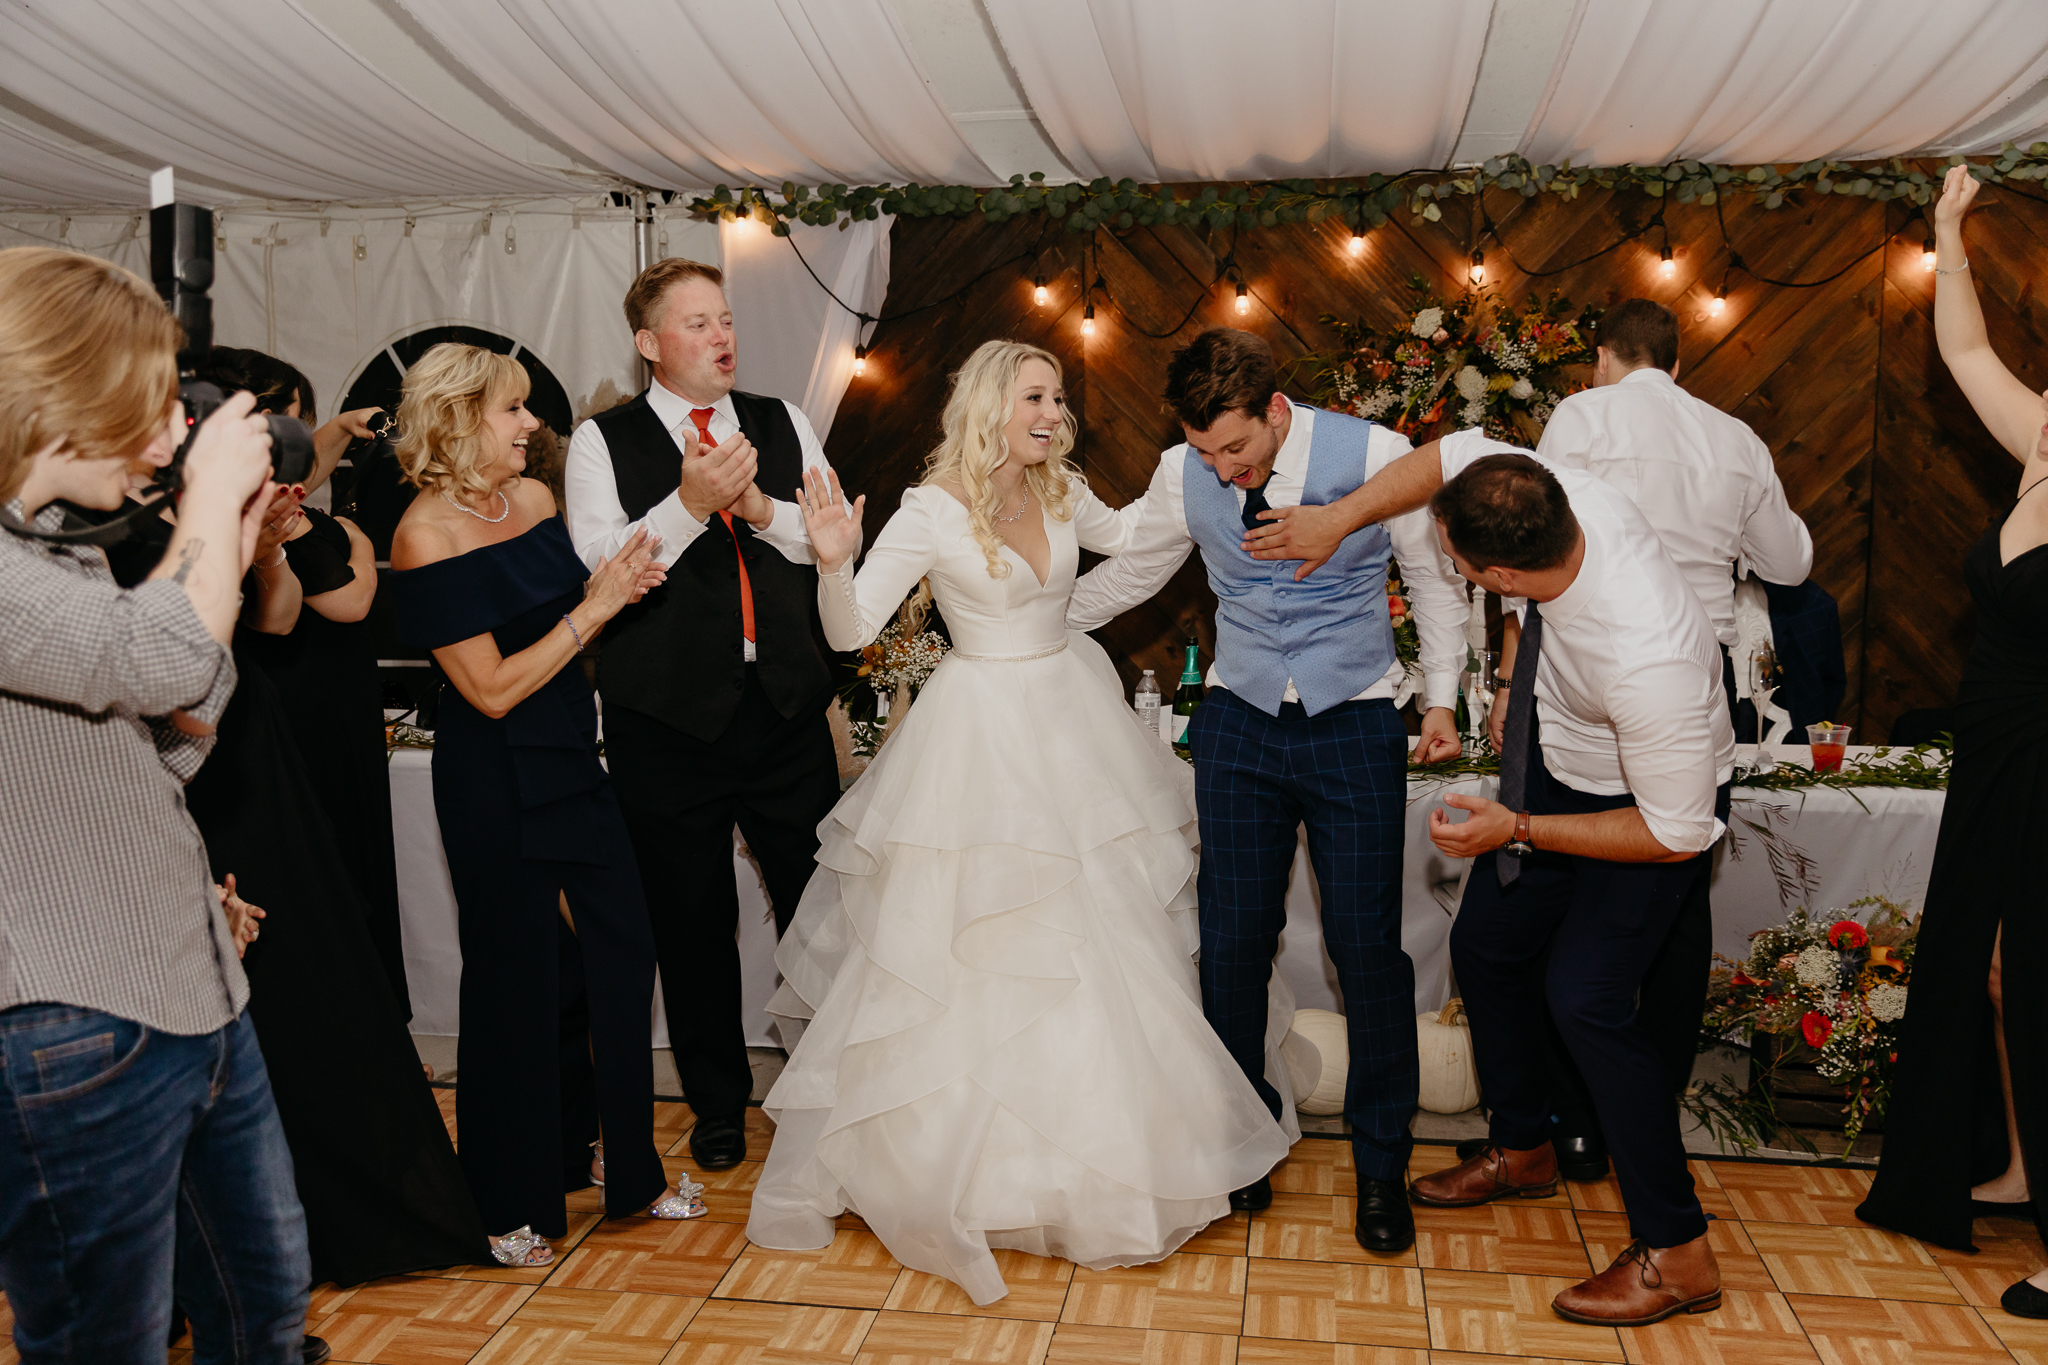 Bride and groom sing and dance with wedding guests on at their tent wedding reception in Chicago